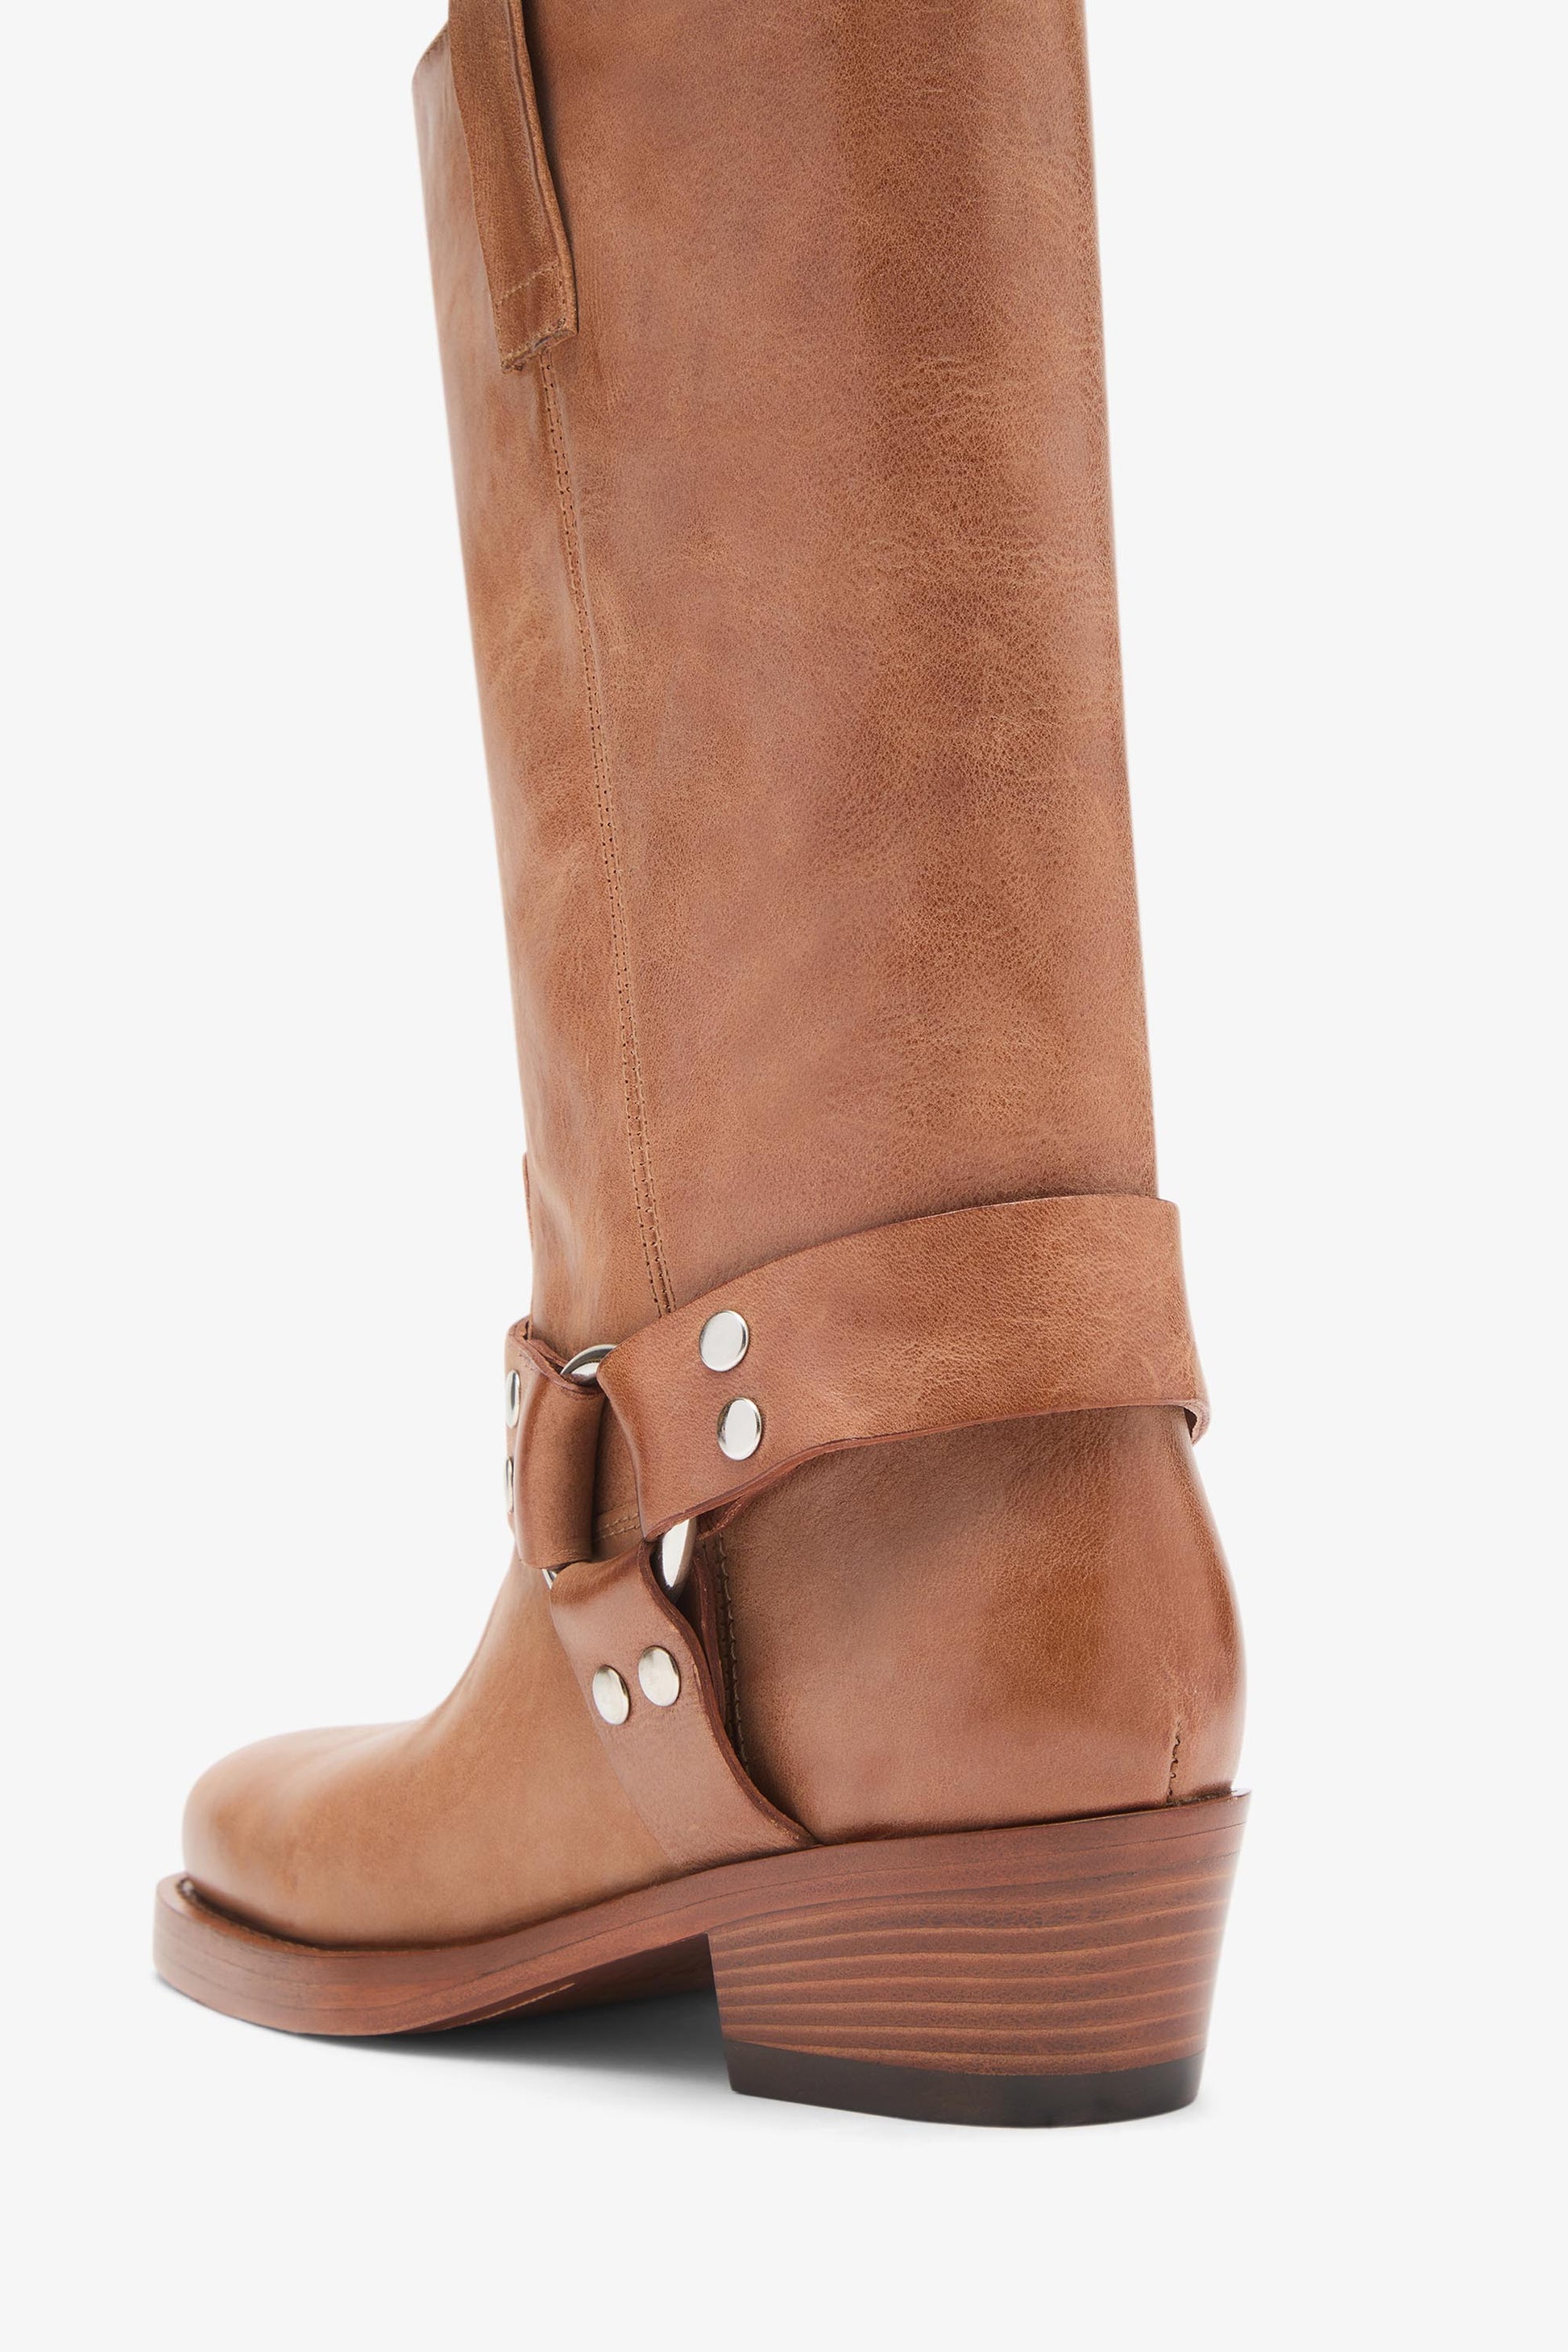 Brown nappa leather boots